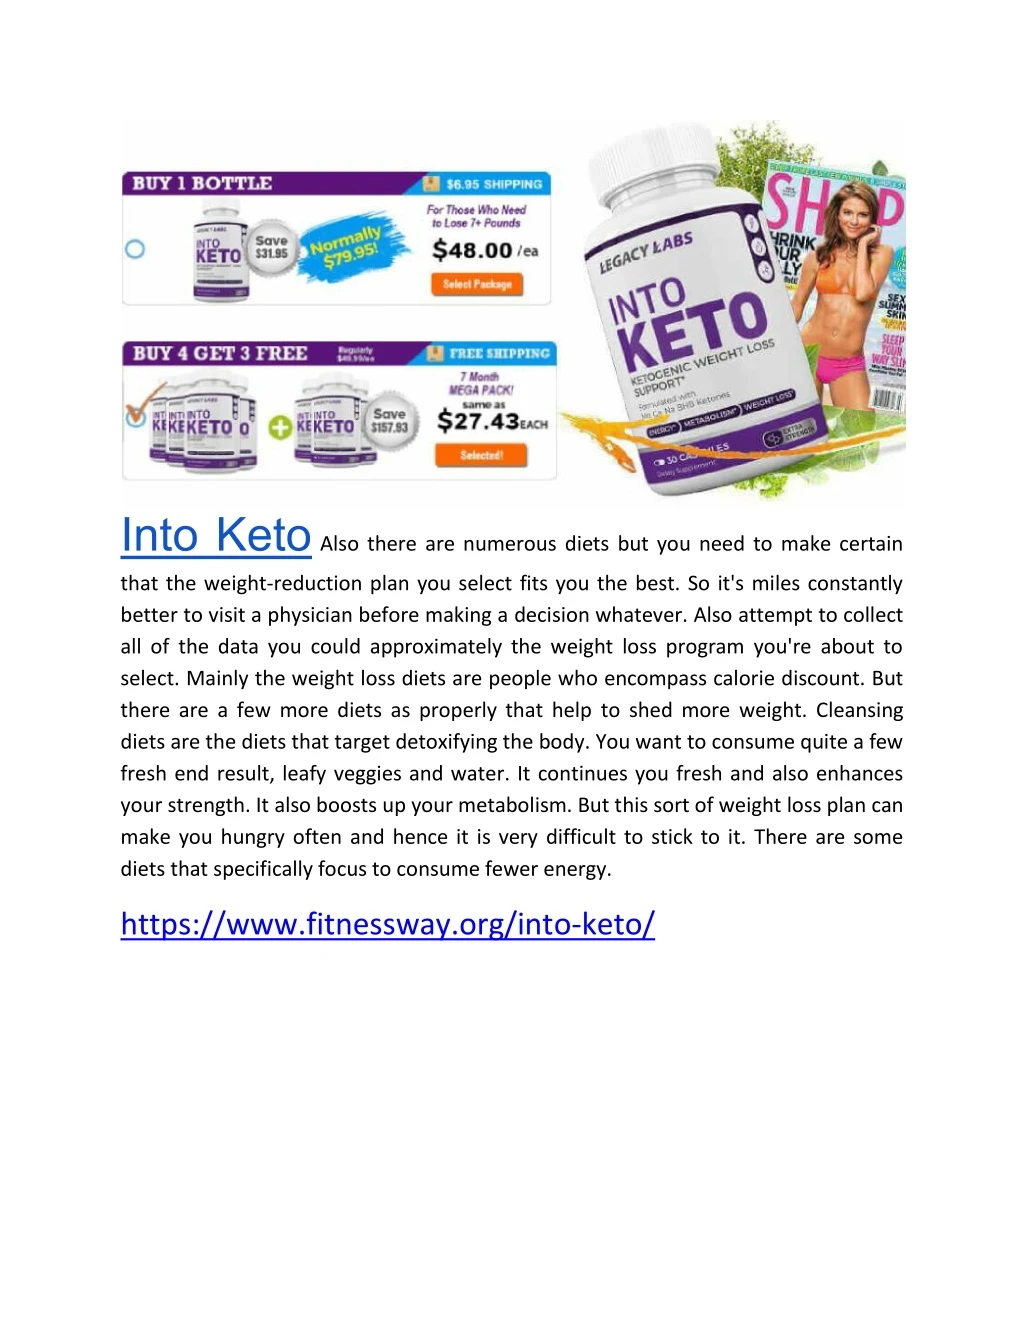 into keto also there are numerous diets